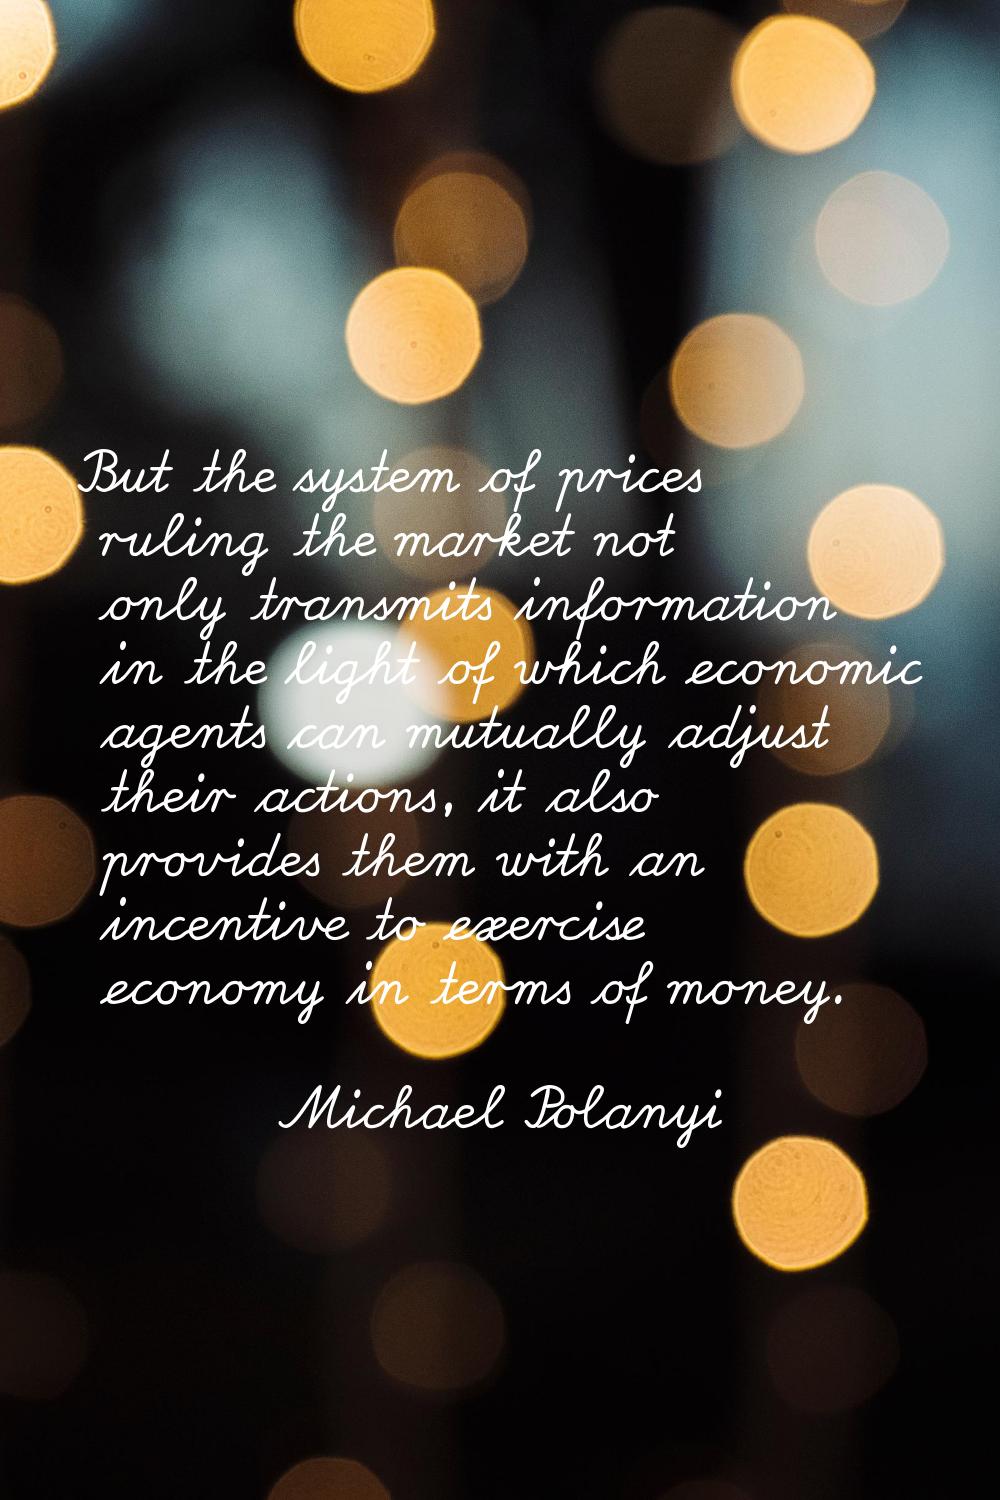 But the system of prices ruling the market not only transmits information in the light of which eco